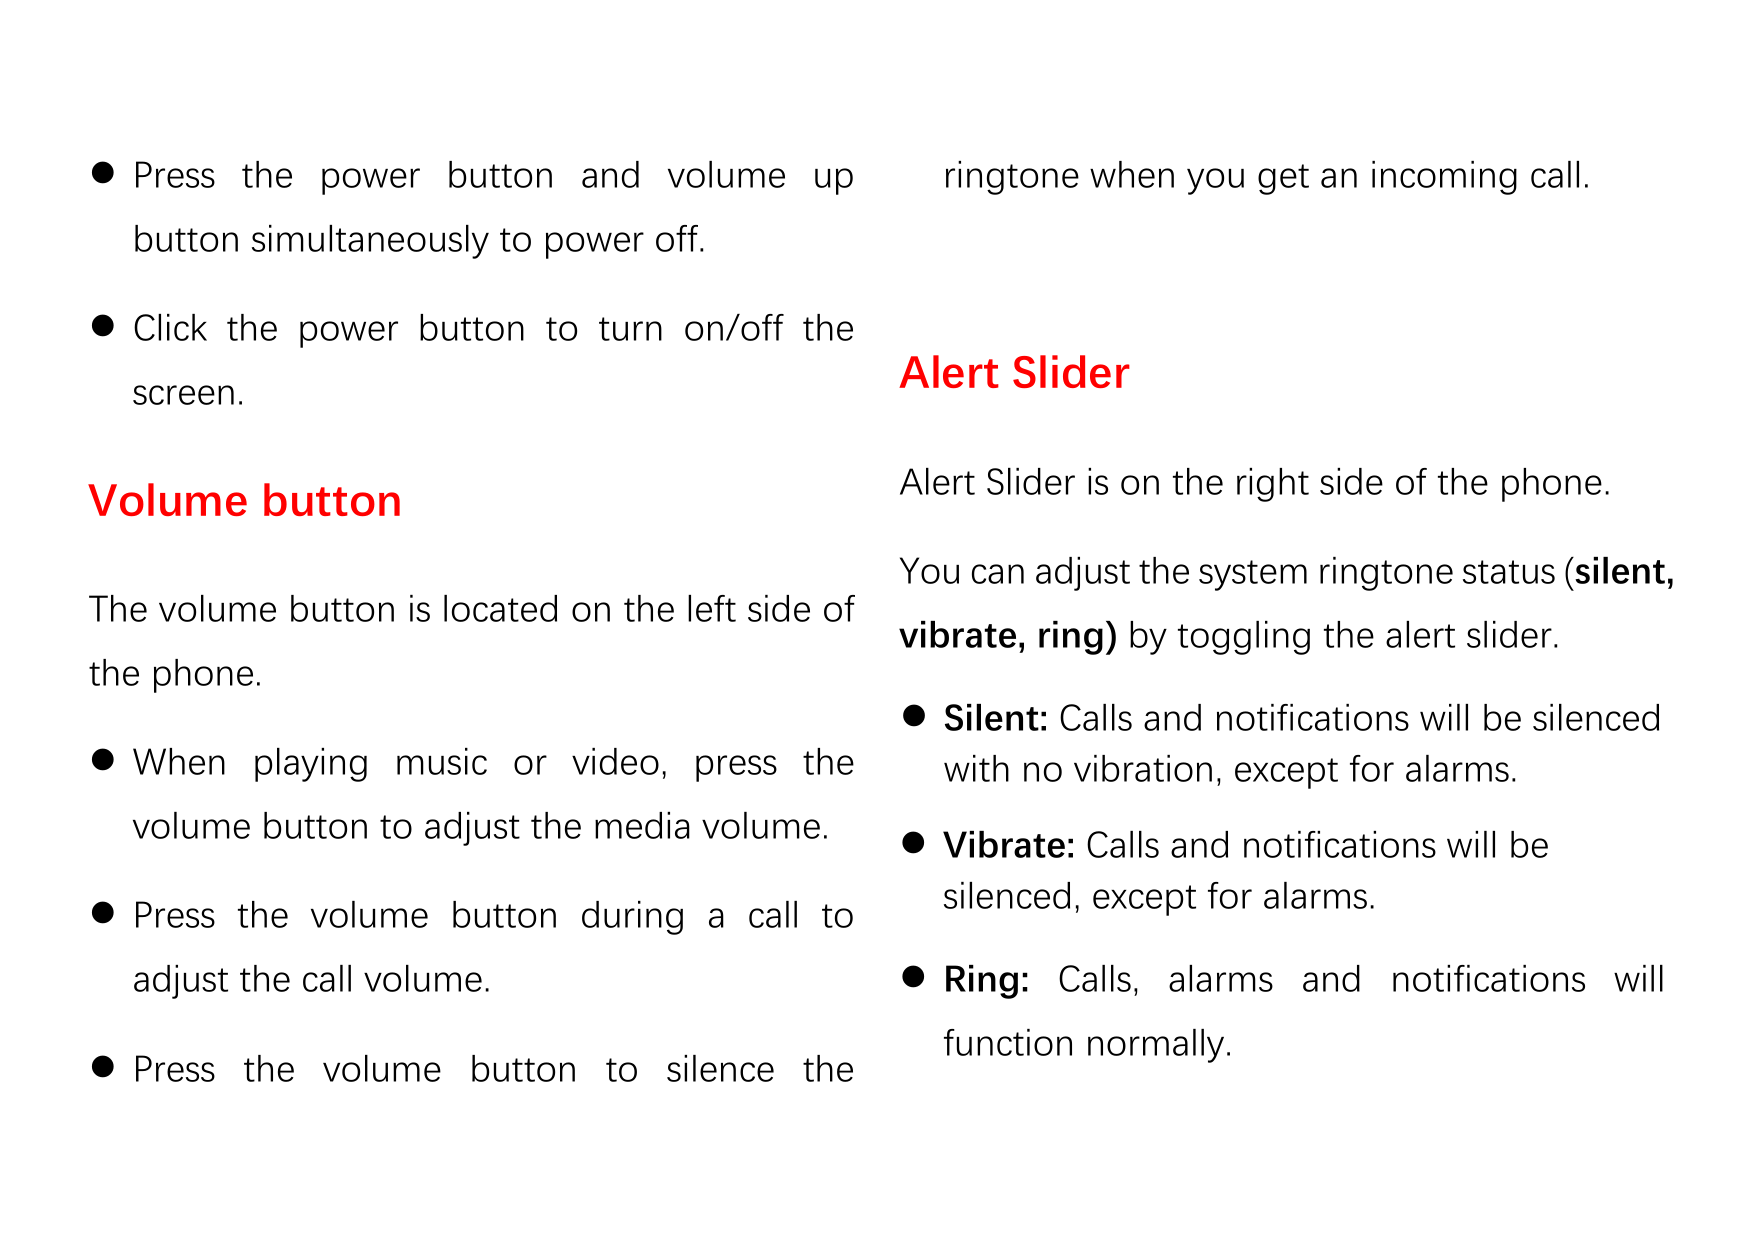  Press the power button and volume upringtone when you get an incoming call.button simultaneously to power off. Click the powe